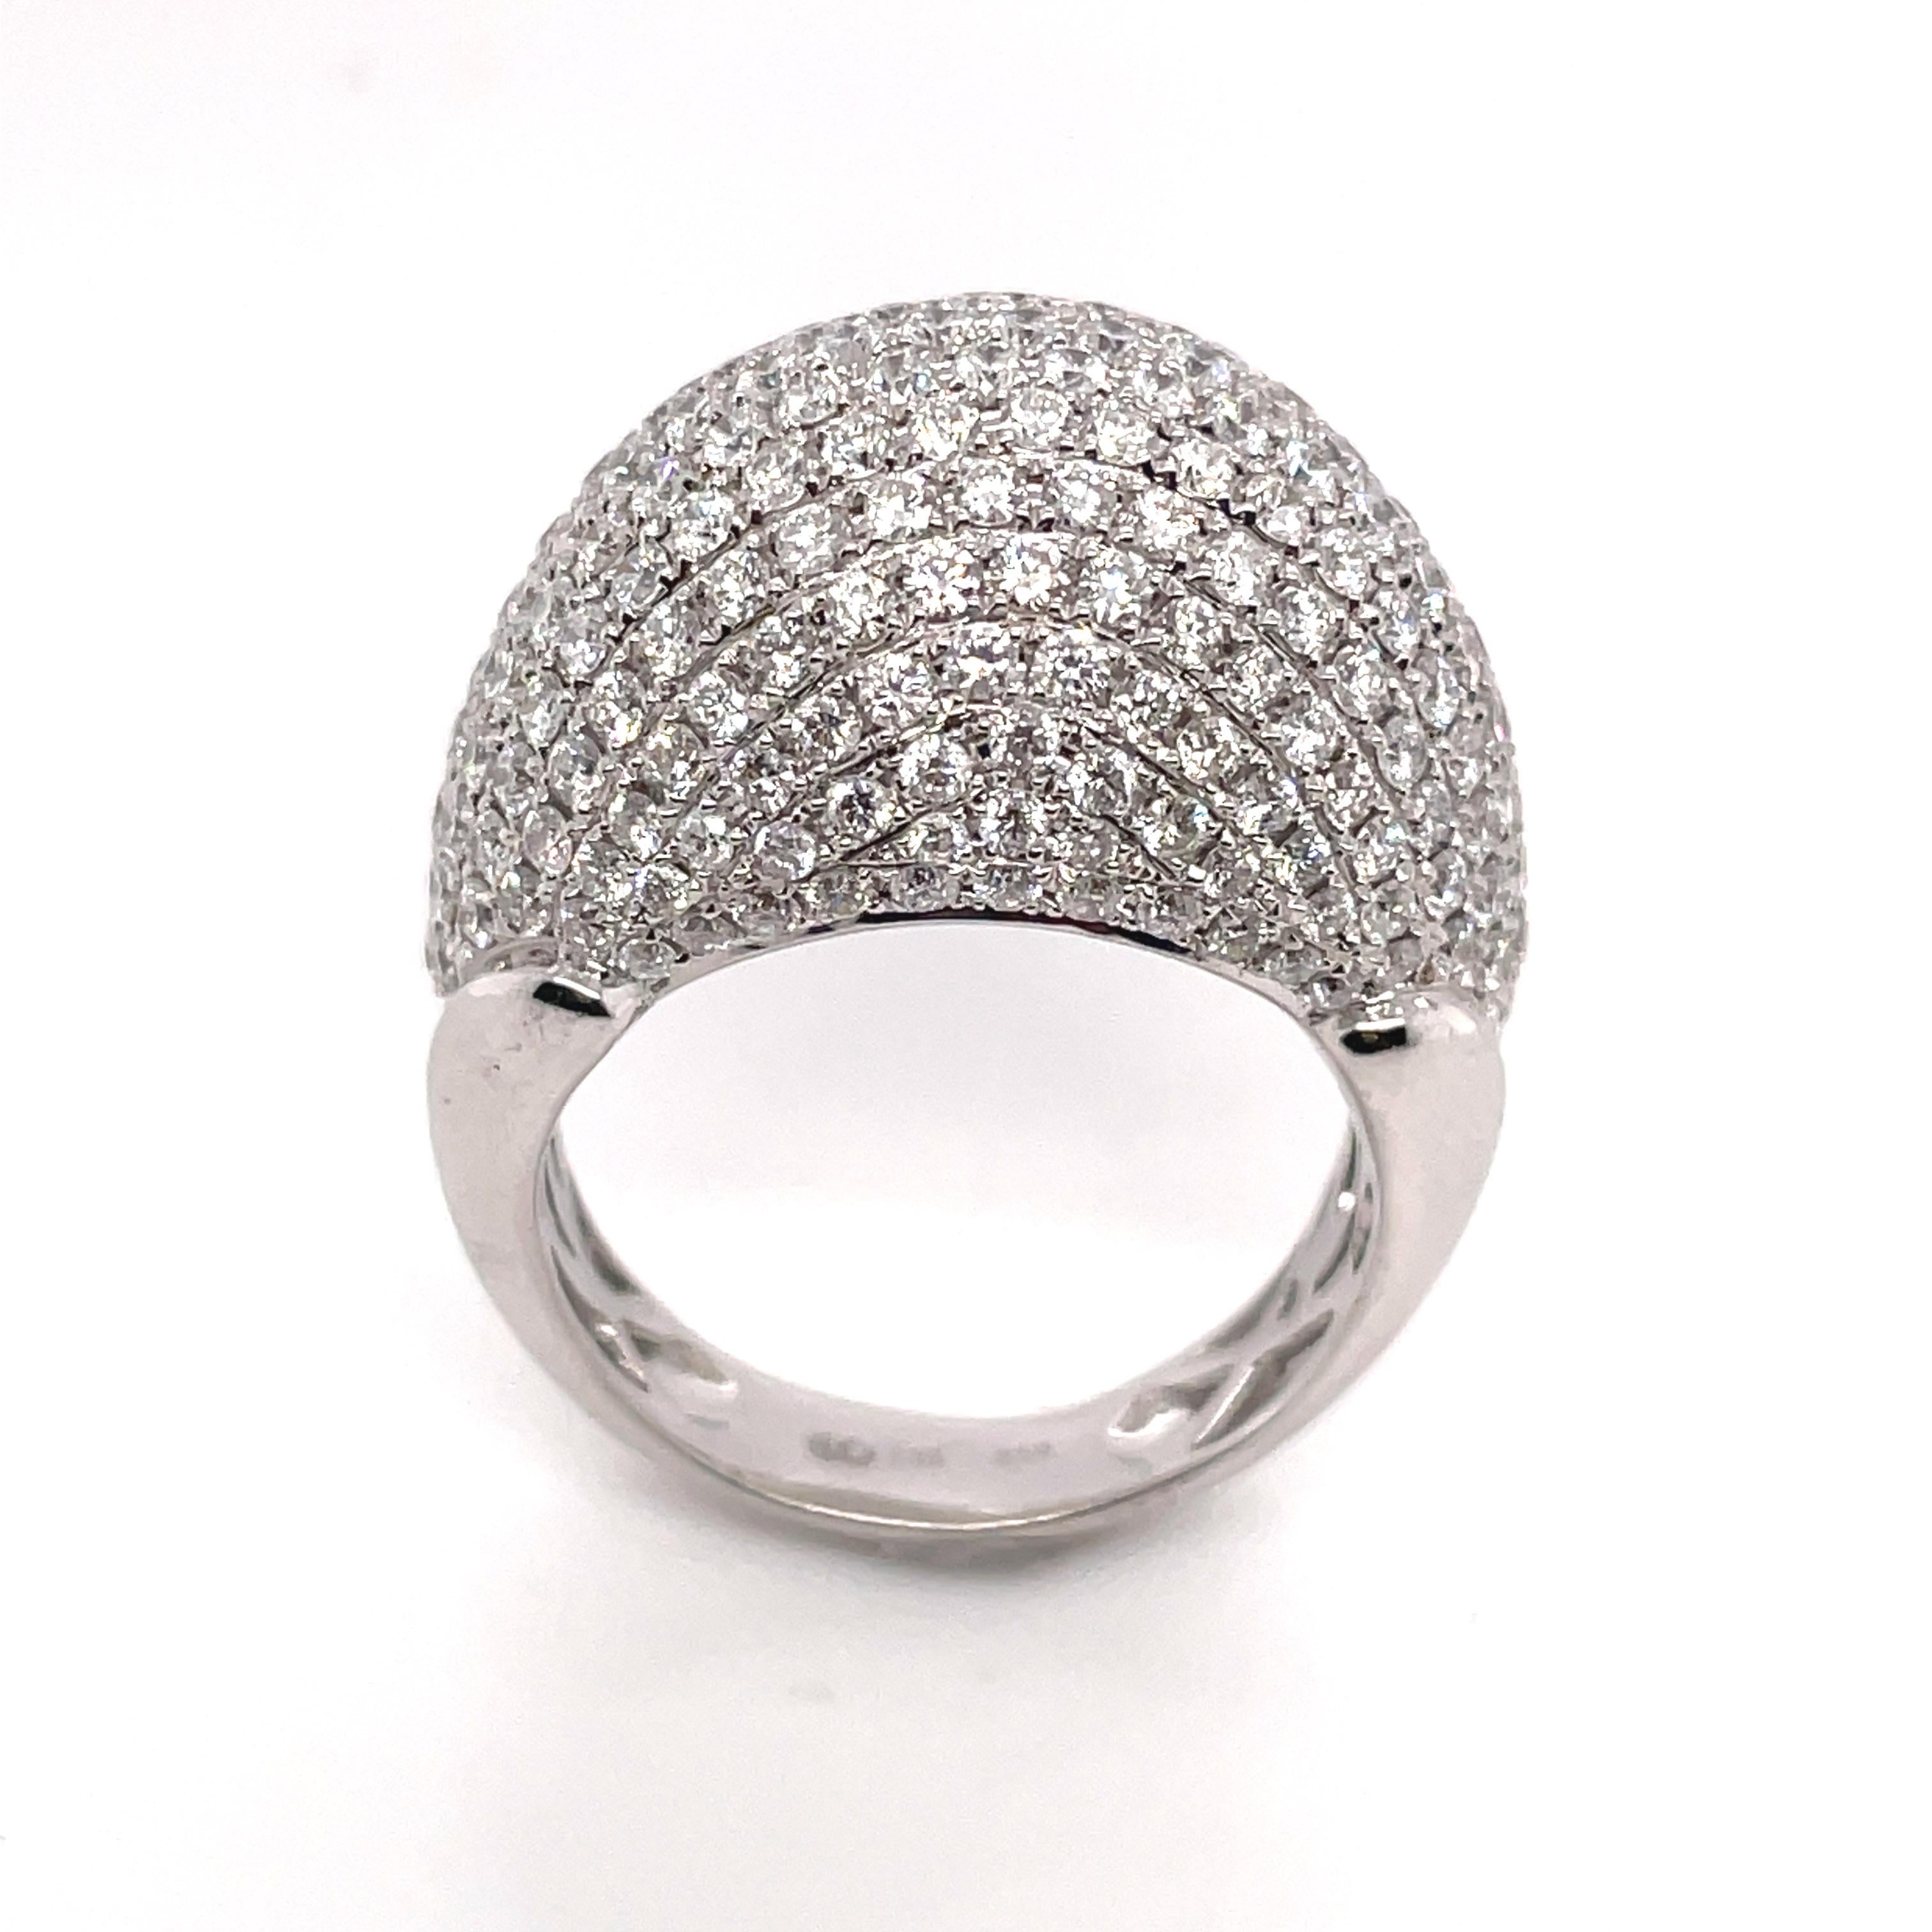 A beautiful white gold ring with round brilliant cut white diamonds. This ring is studded with 198 round brilliant cut diamonds. All the stones are pave set. The total diamond weight is 3.10ct. The white diamonds are F-G color and VS2/SI1 clarity.